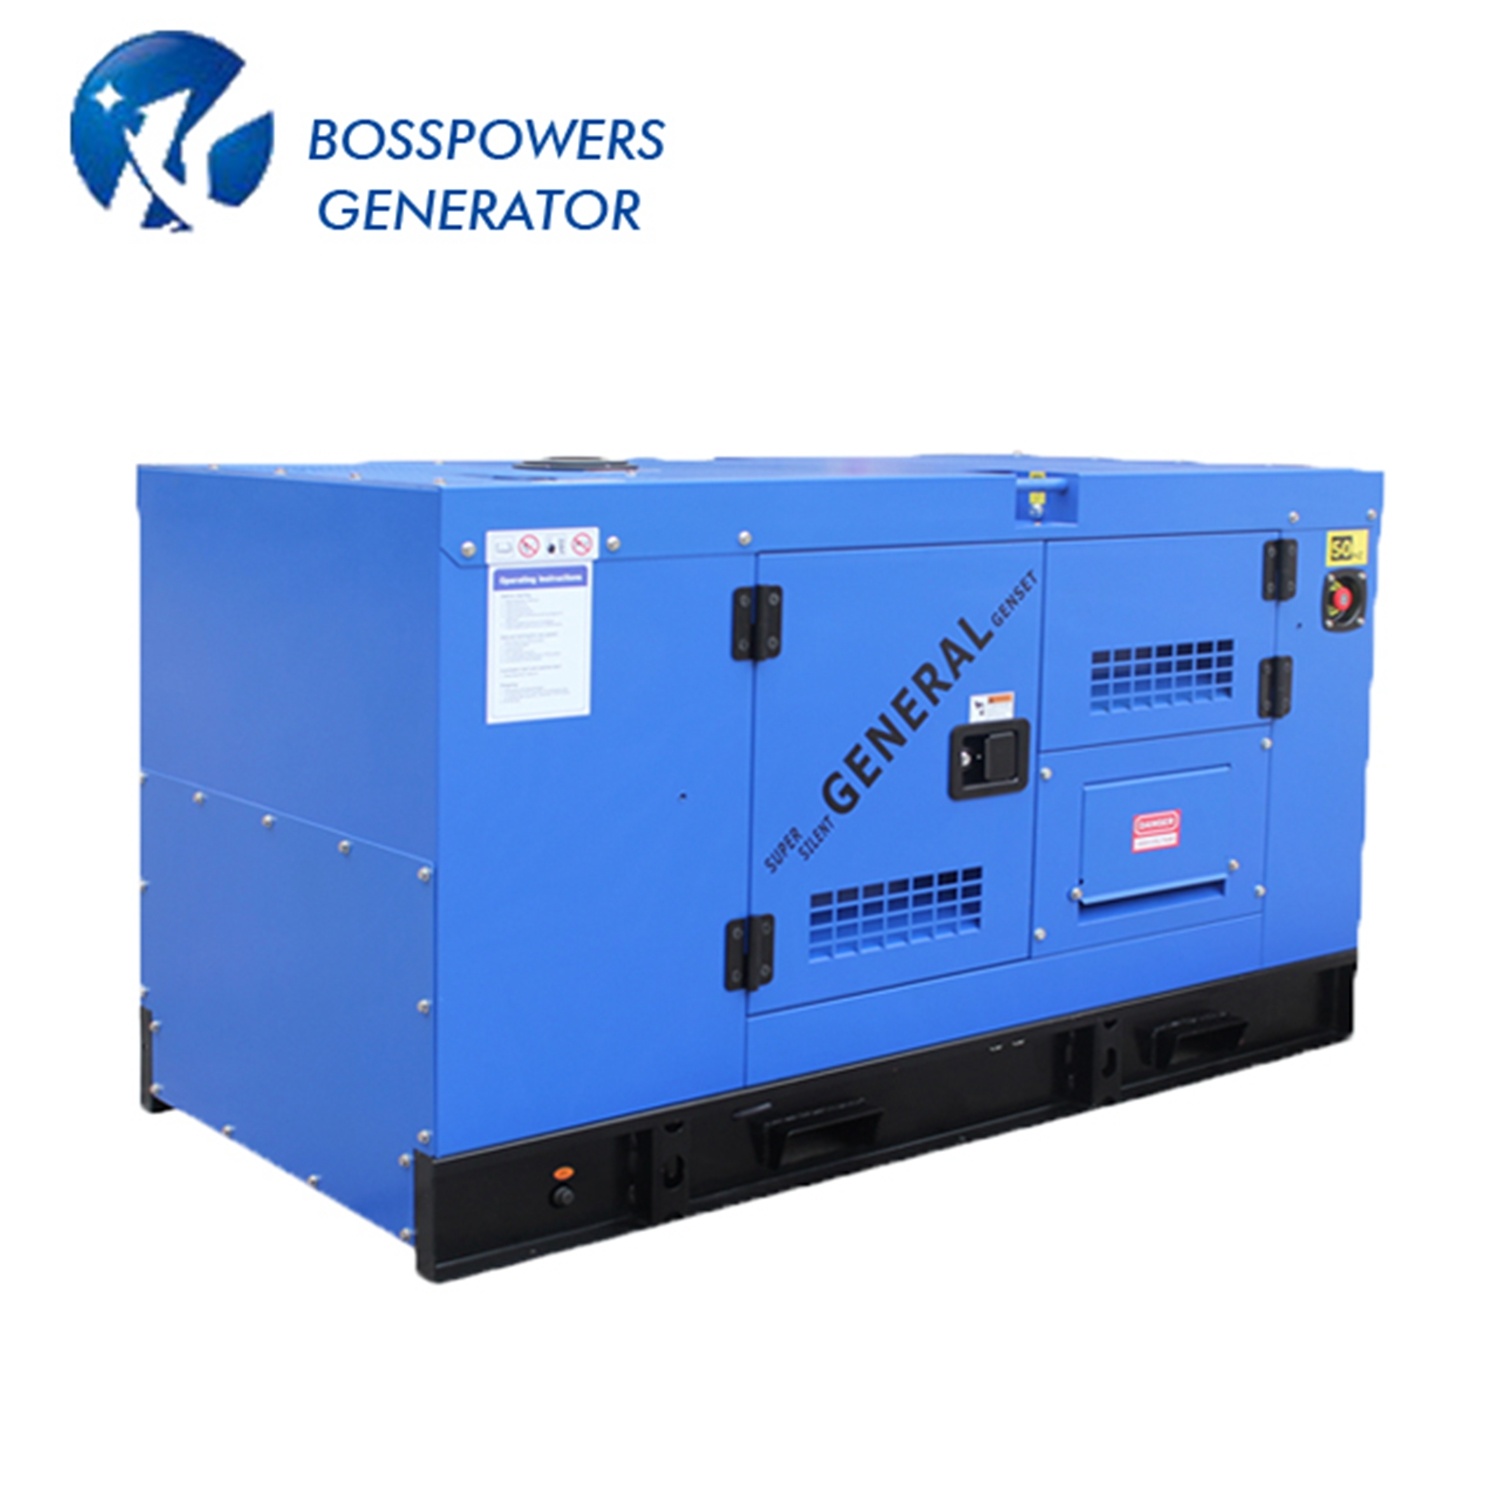 1800rpm 60Hz Single Phase Yangodng Low Noise Electric Generator 13kw